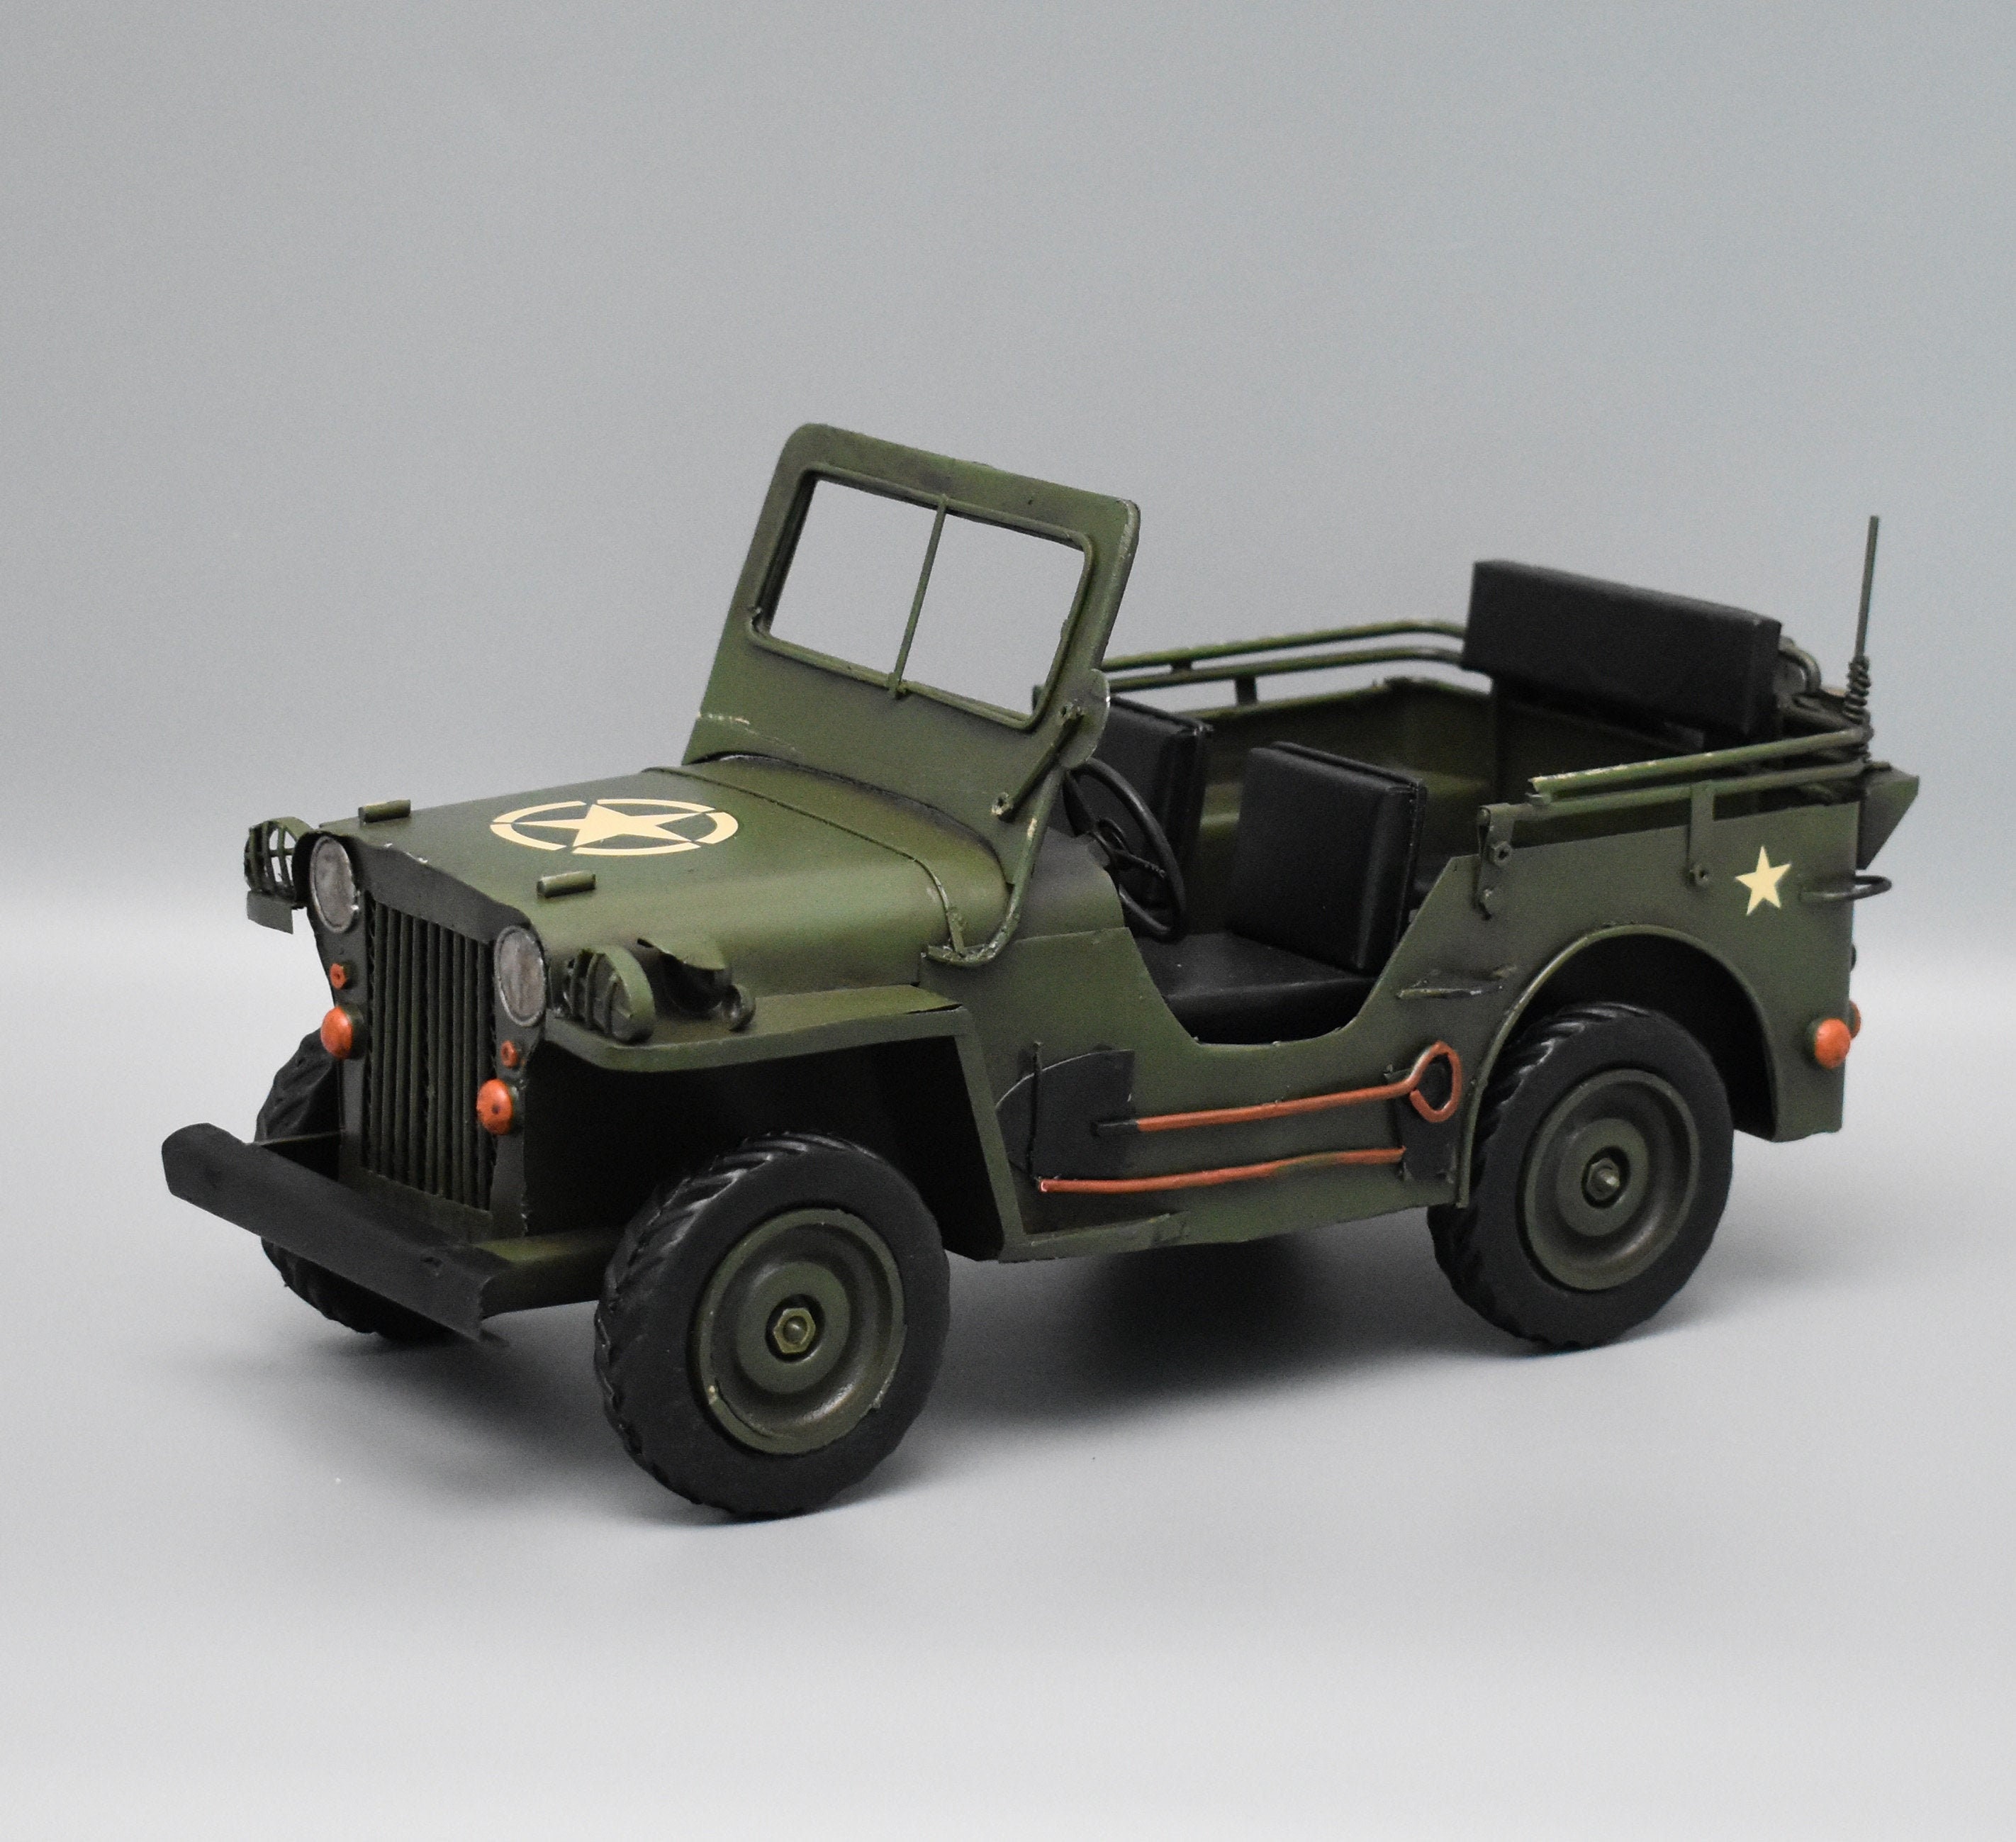 The Willys Jeep Cart - MILITARY VEHICLES - U.S. Militaria Forum